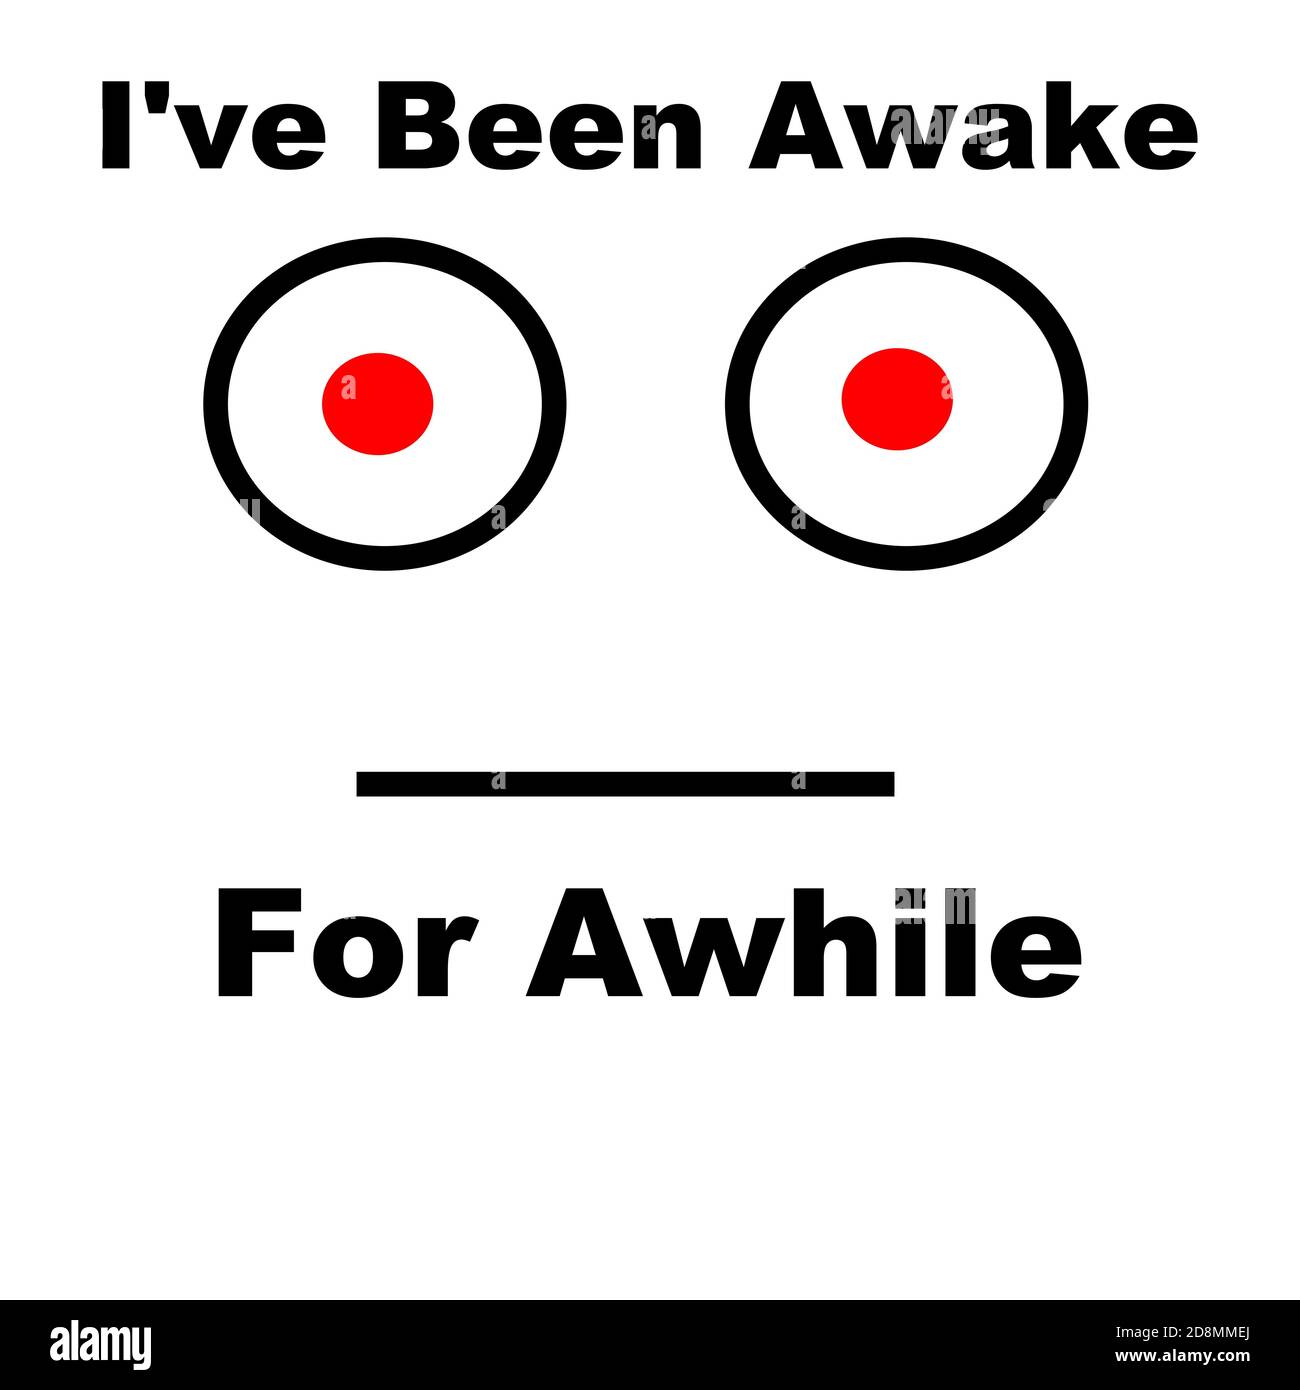 Cartoon face with frown and message I've been awake for awhile. Stock Photo